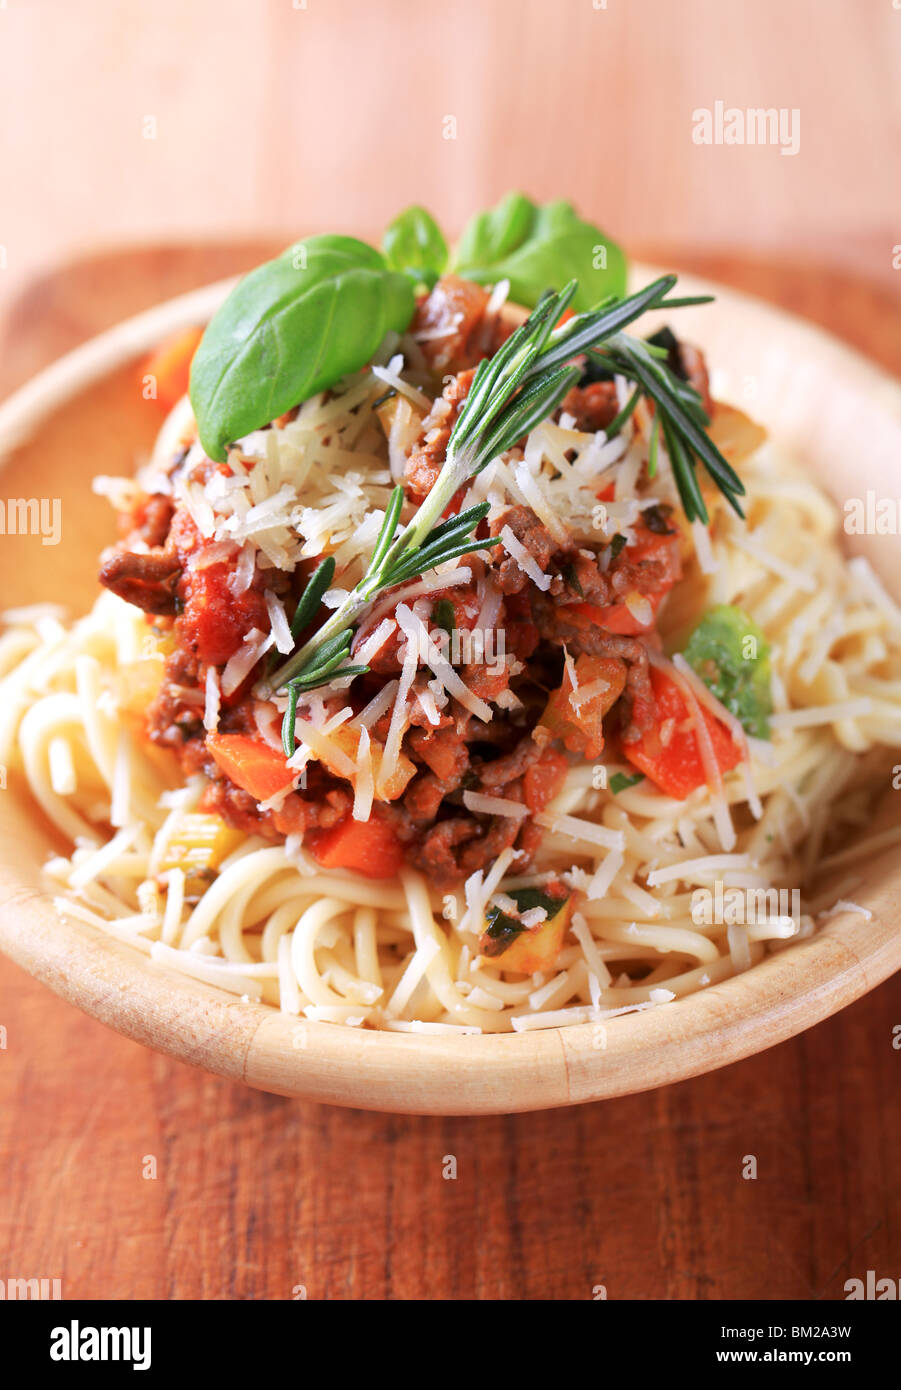 Bolognese sauce on a bed of spaghetti sprinkled with Parmesan Stock Photo